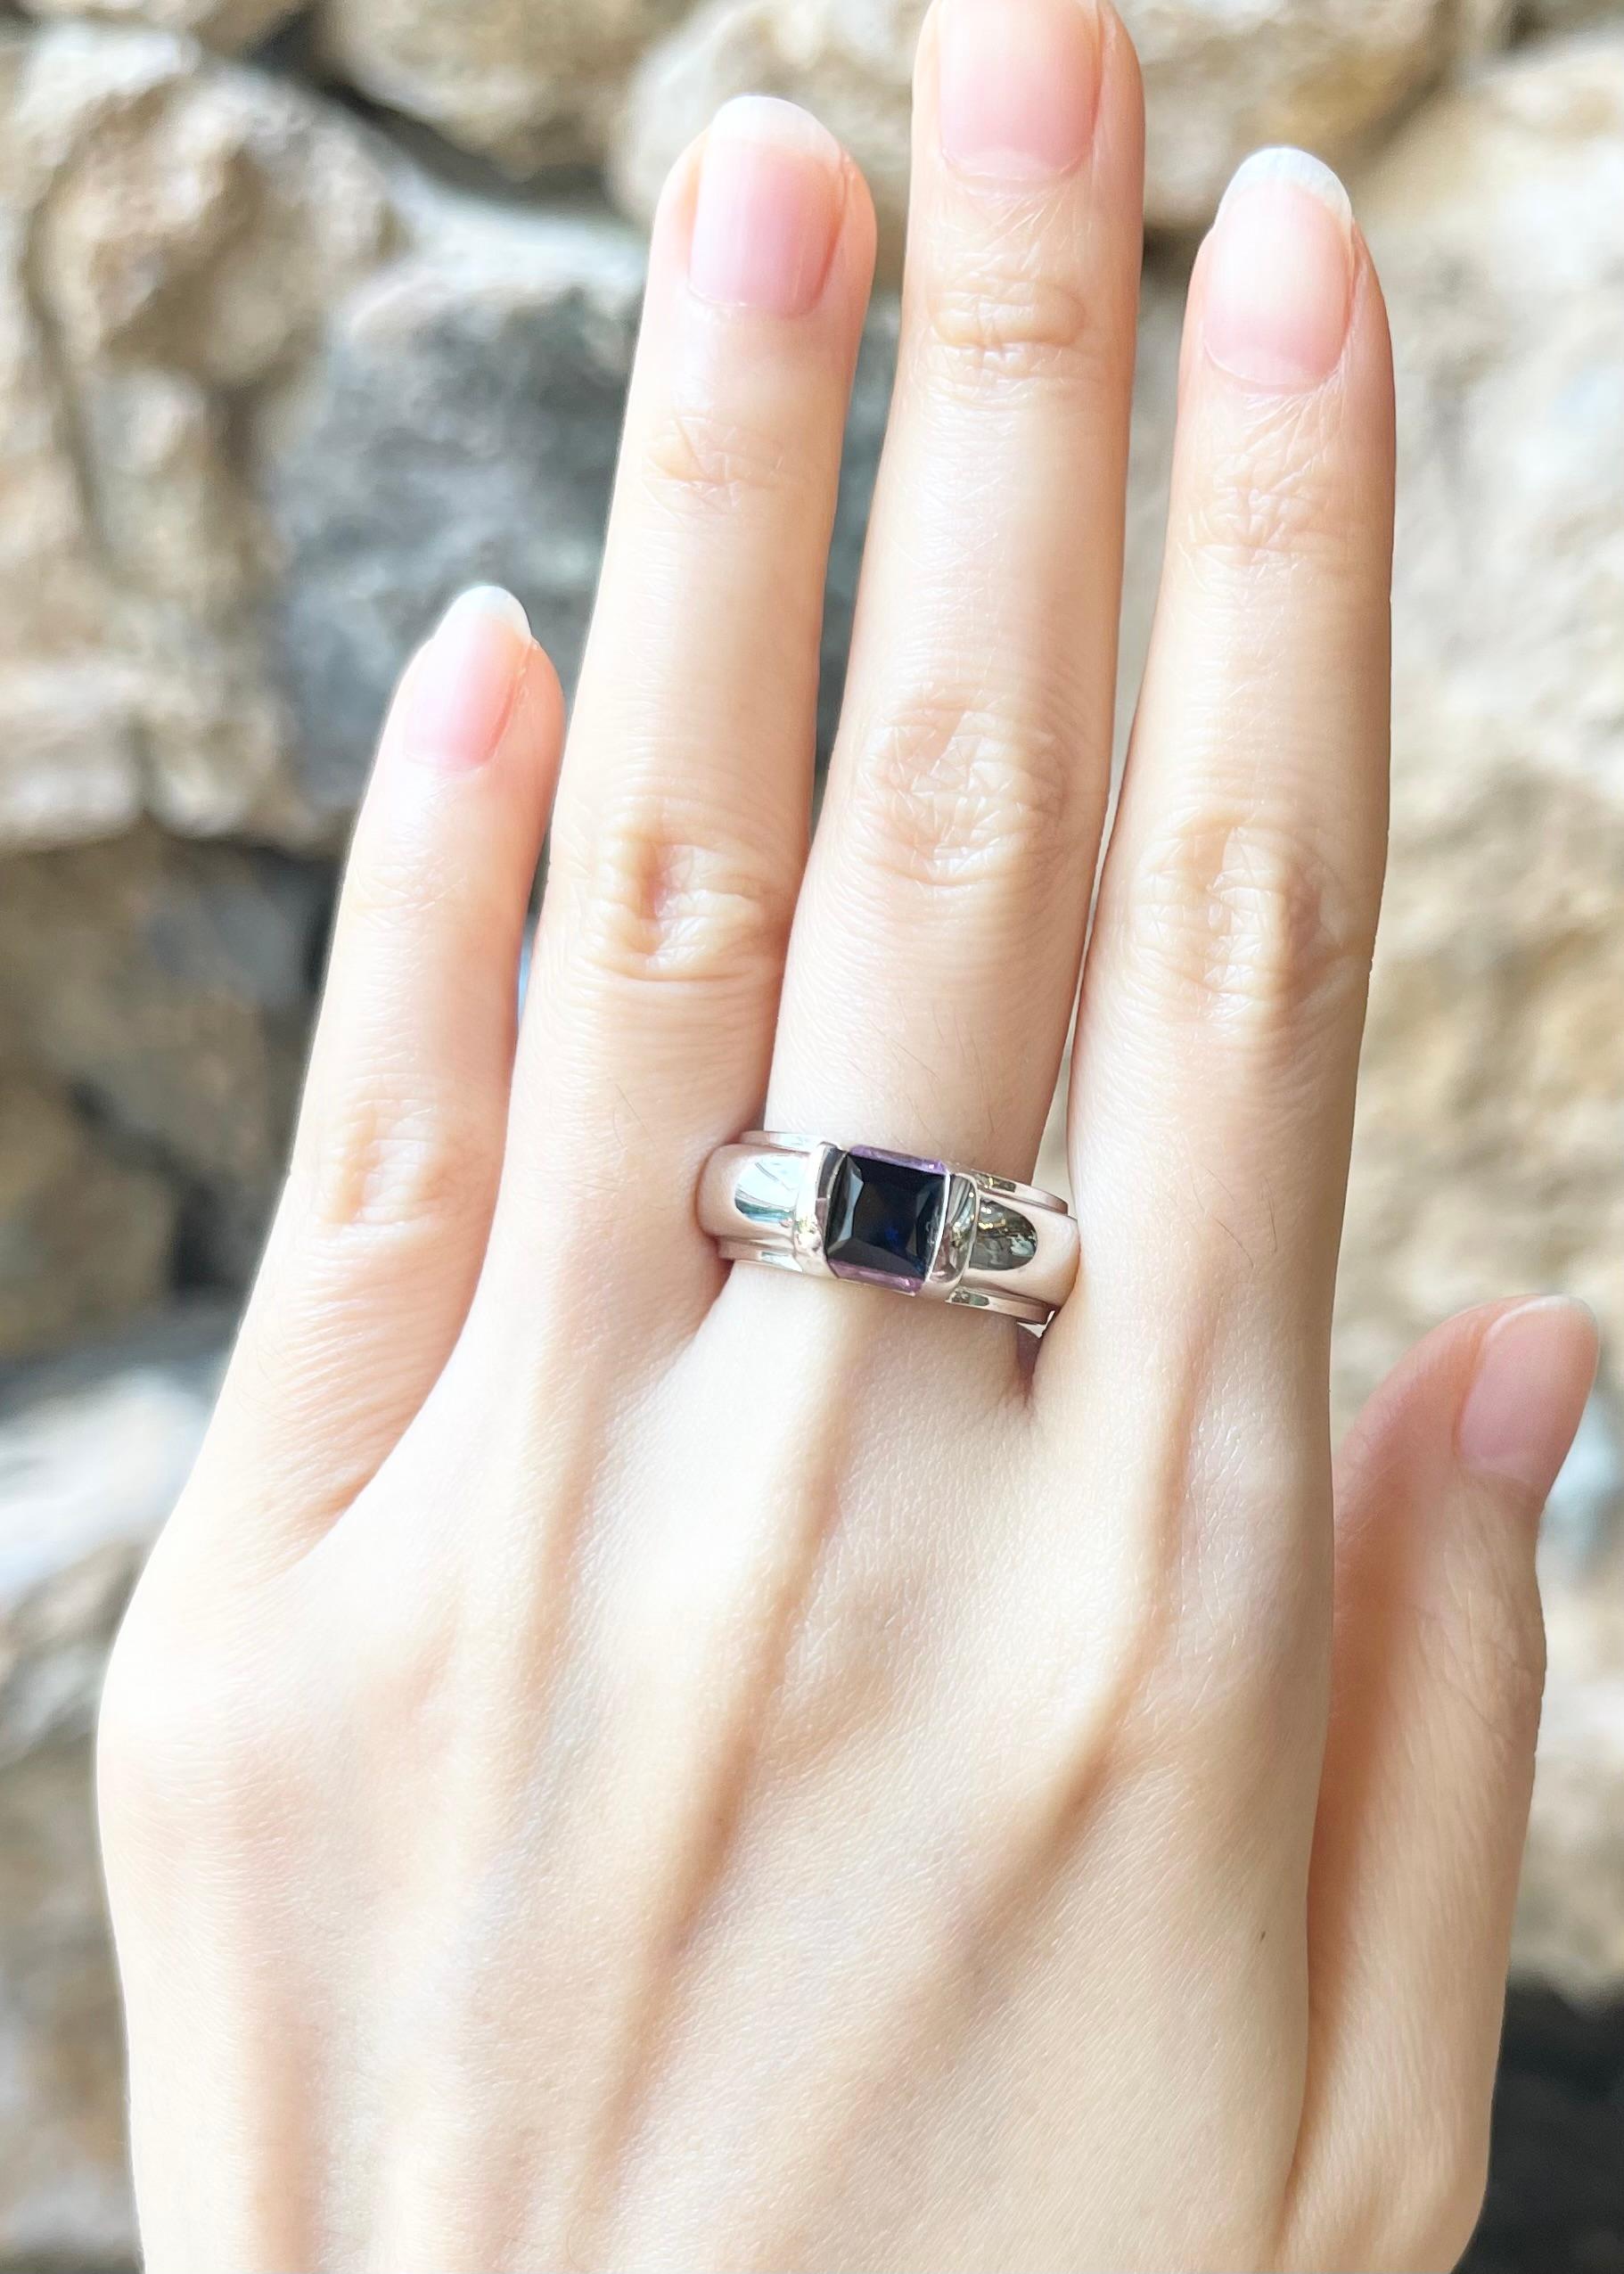 Black Sapphire 1.21 carats with Pink Sapphire 0.79 carat Ring set in 18K White Gold Settings

Width:  0.6 cm 
Length: 0.7 cm
Ring Size: 59
Total Weight: 17.73 grams

